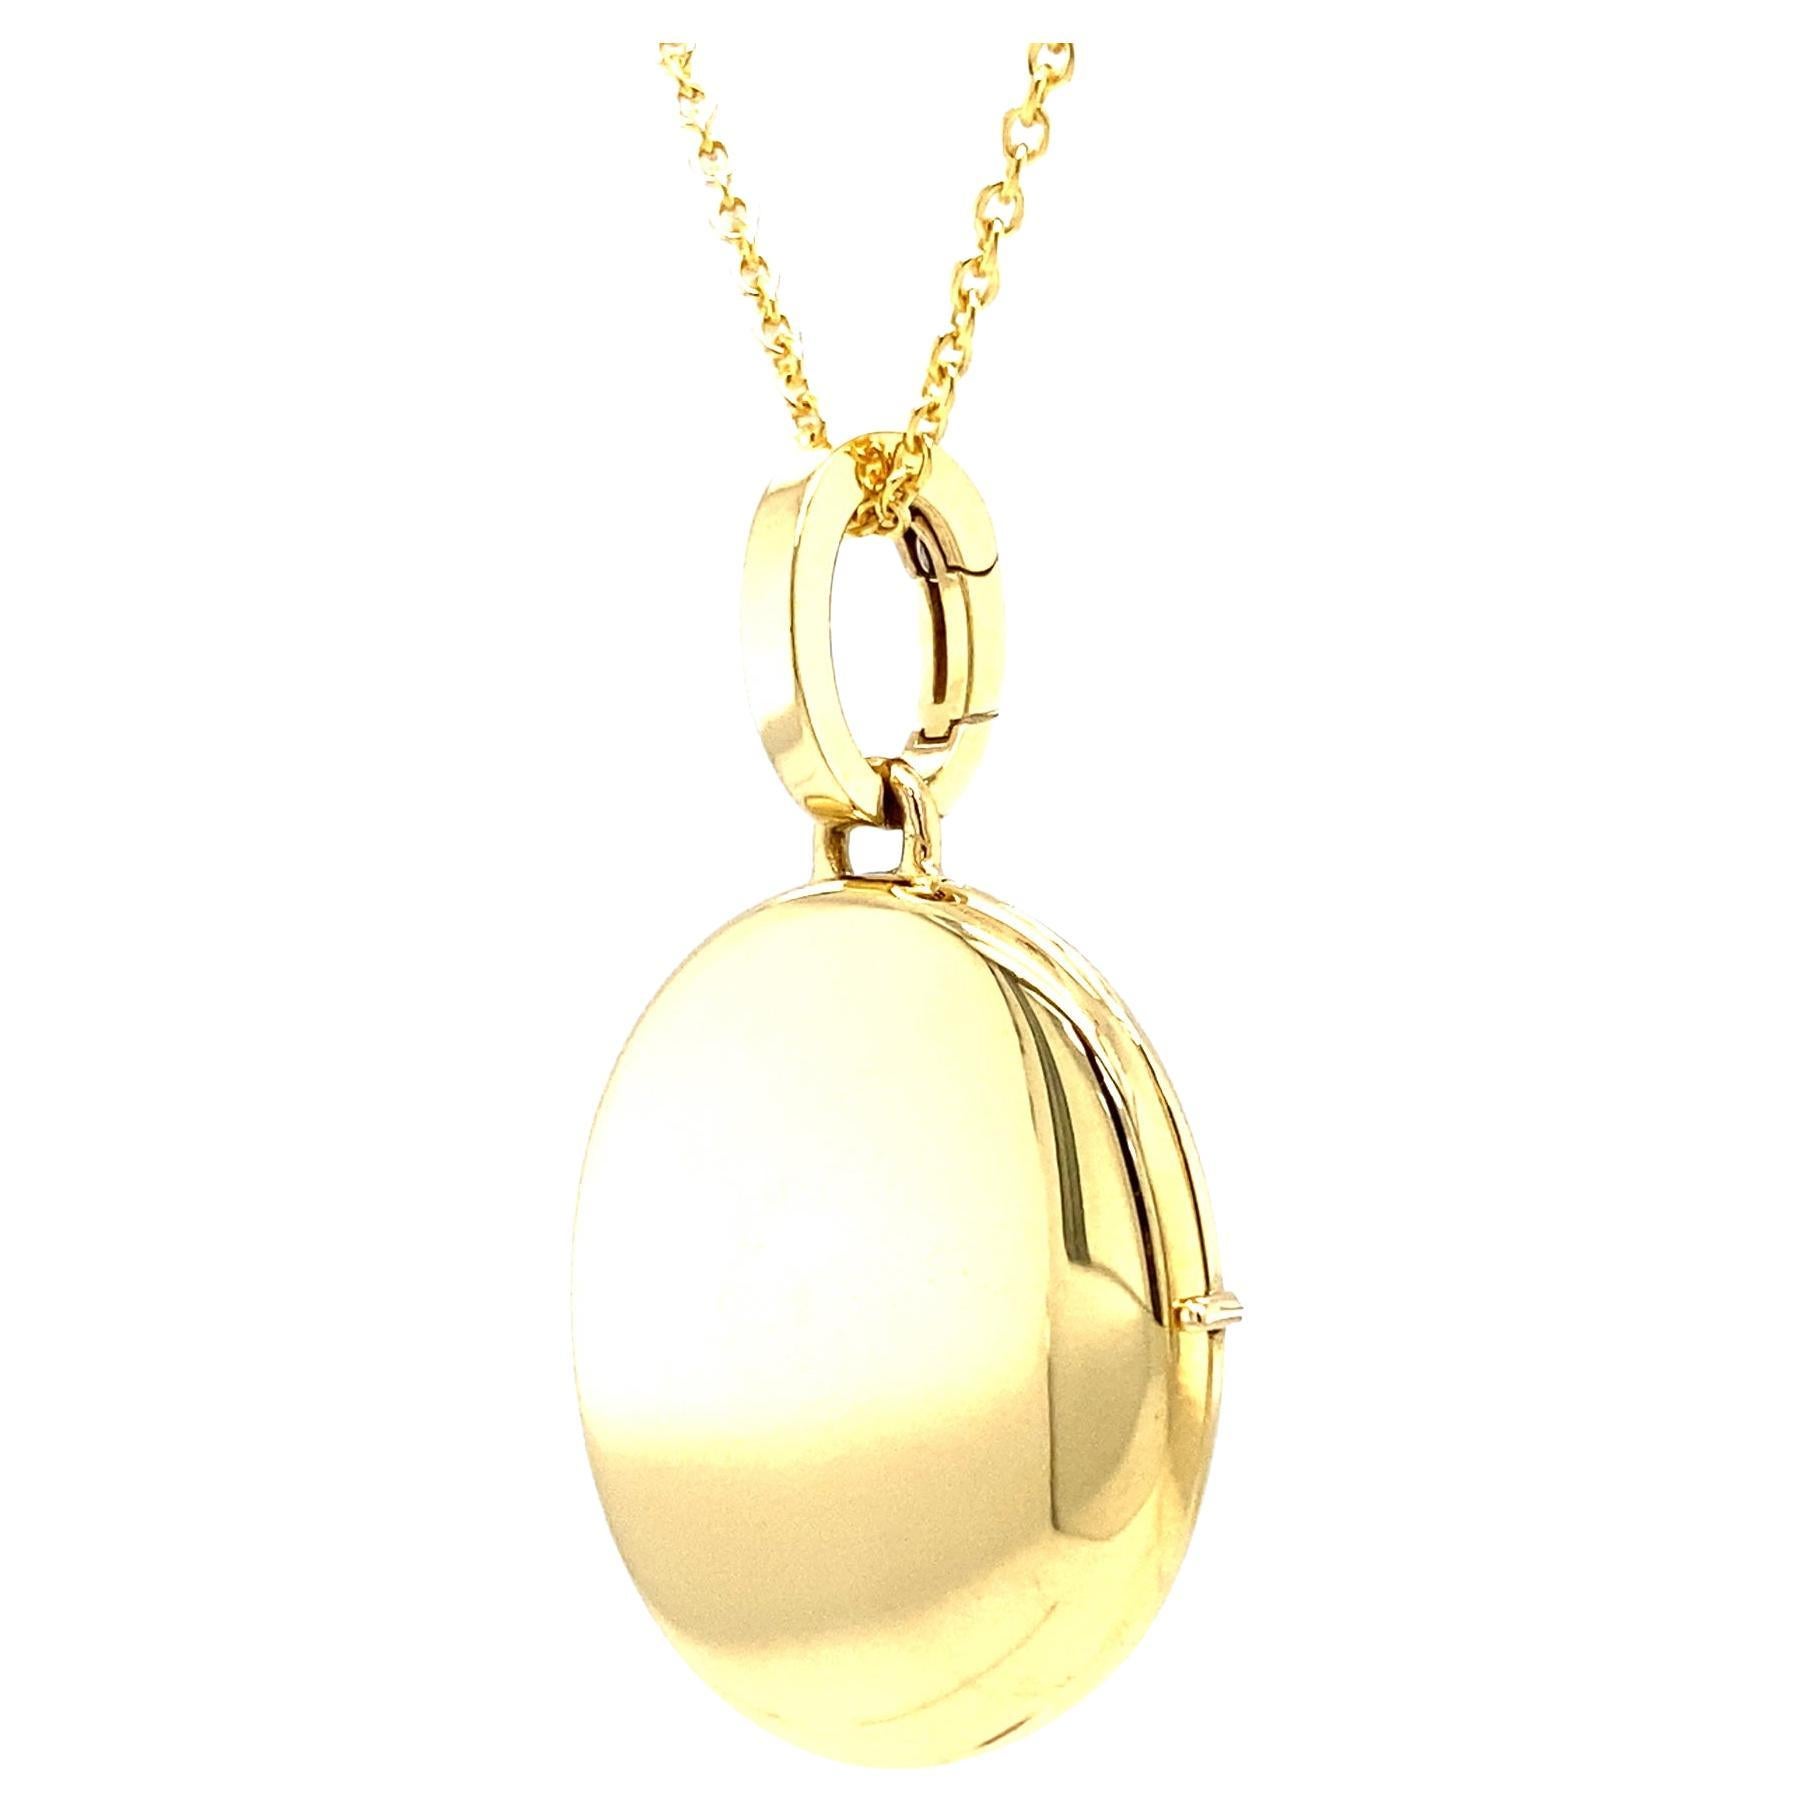 Customizable Oval Polished Pendant Locket Necklace 18k Yellow Gold 23 mm x 20 mm For Sale